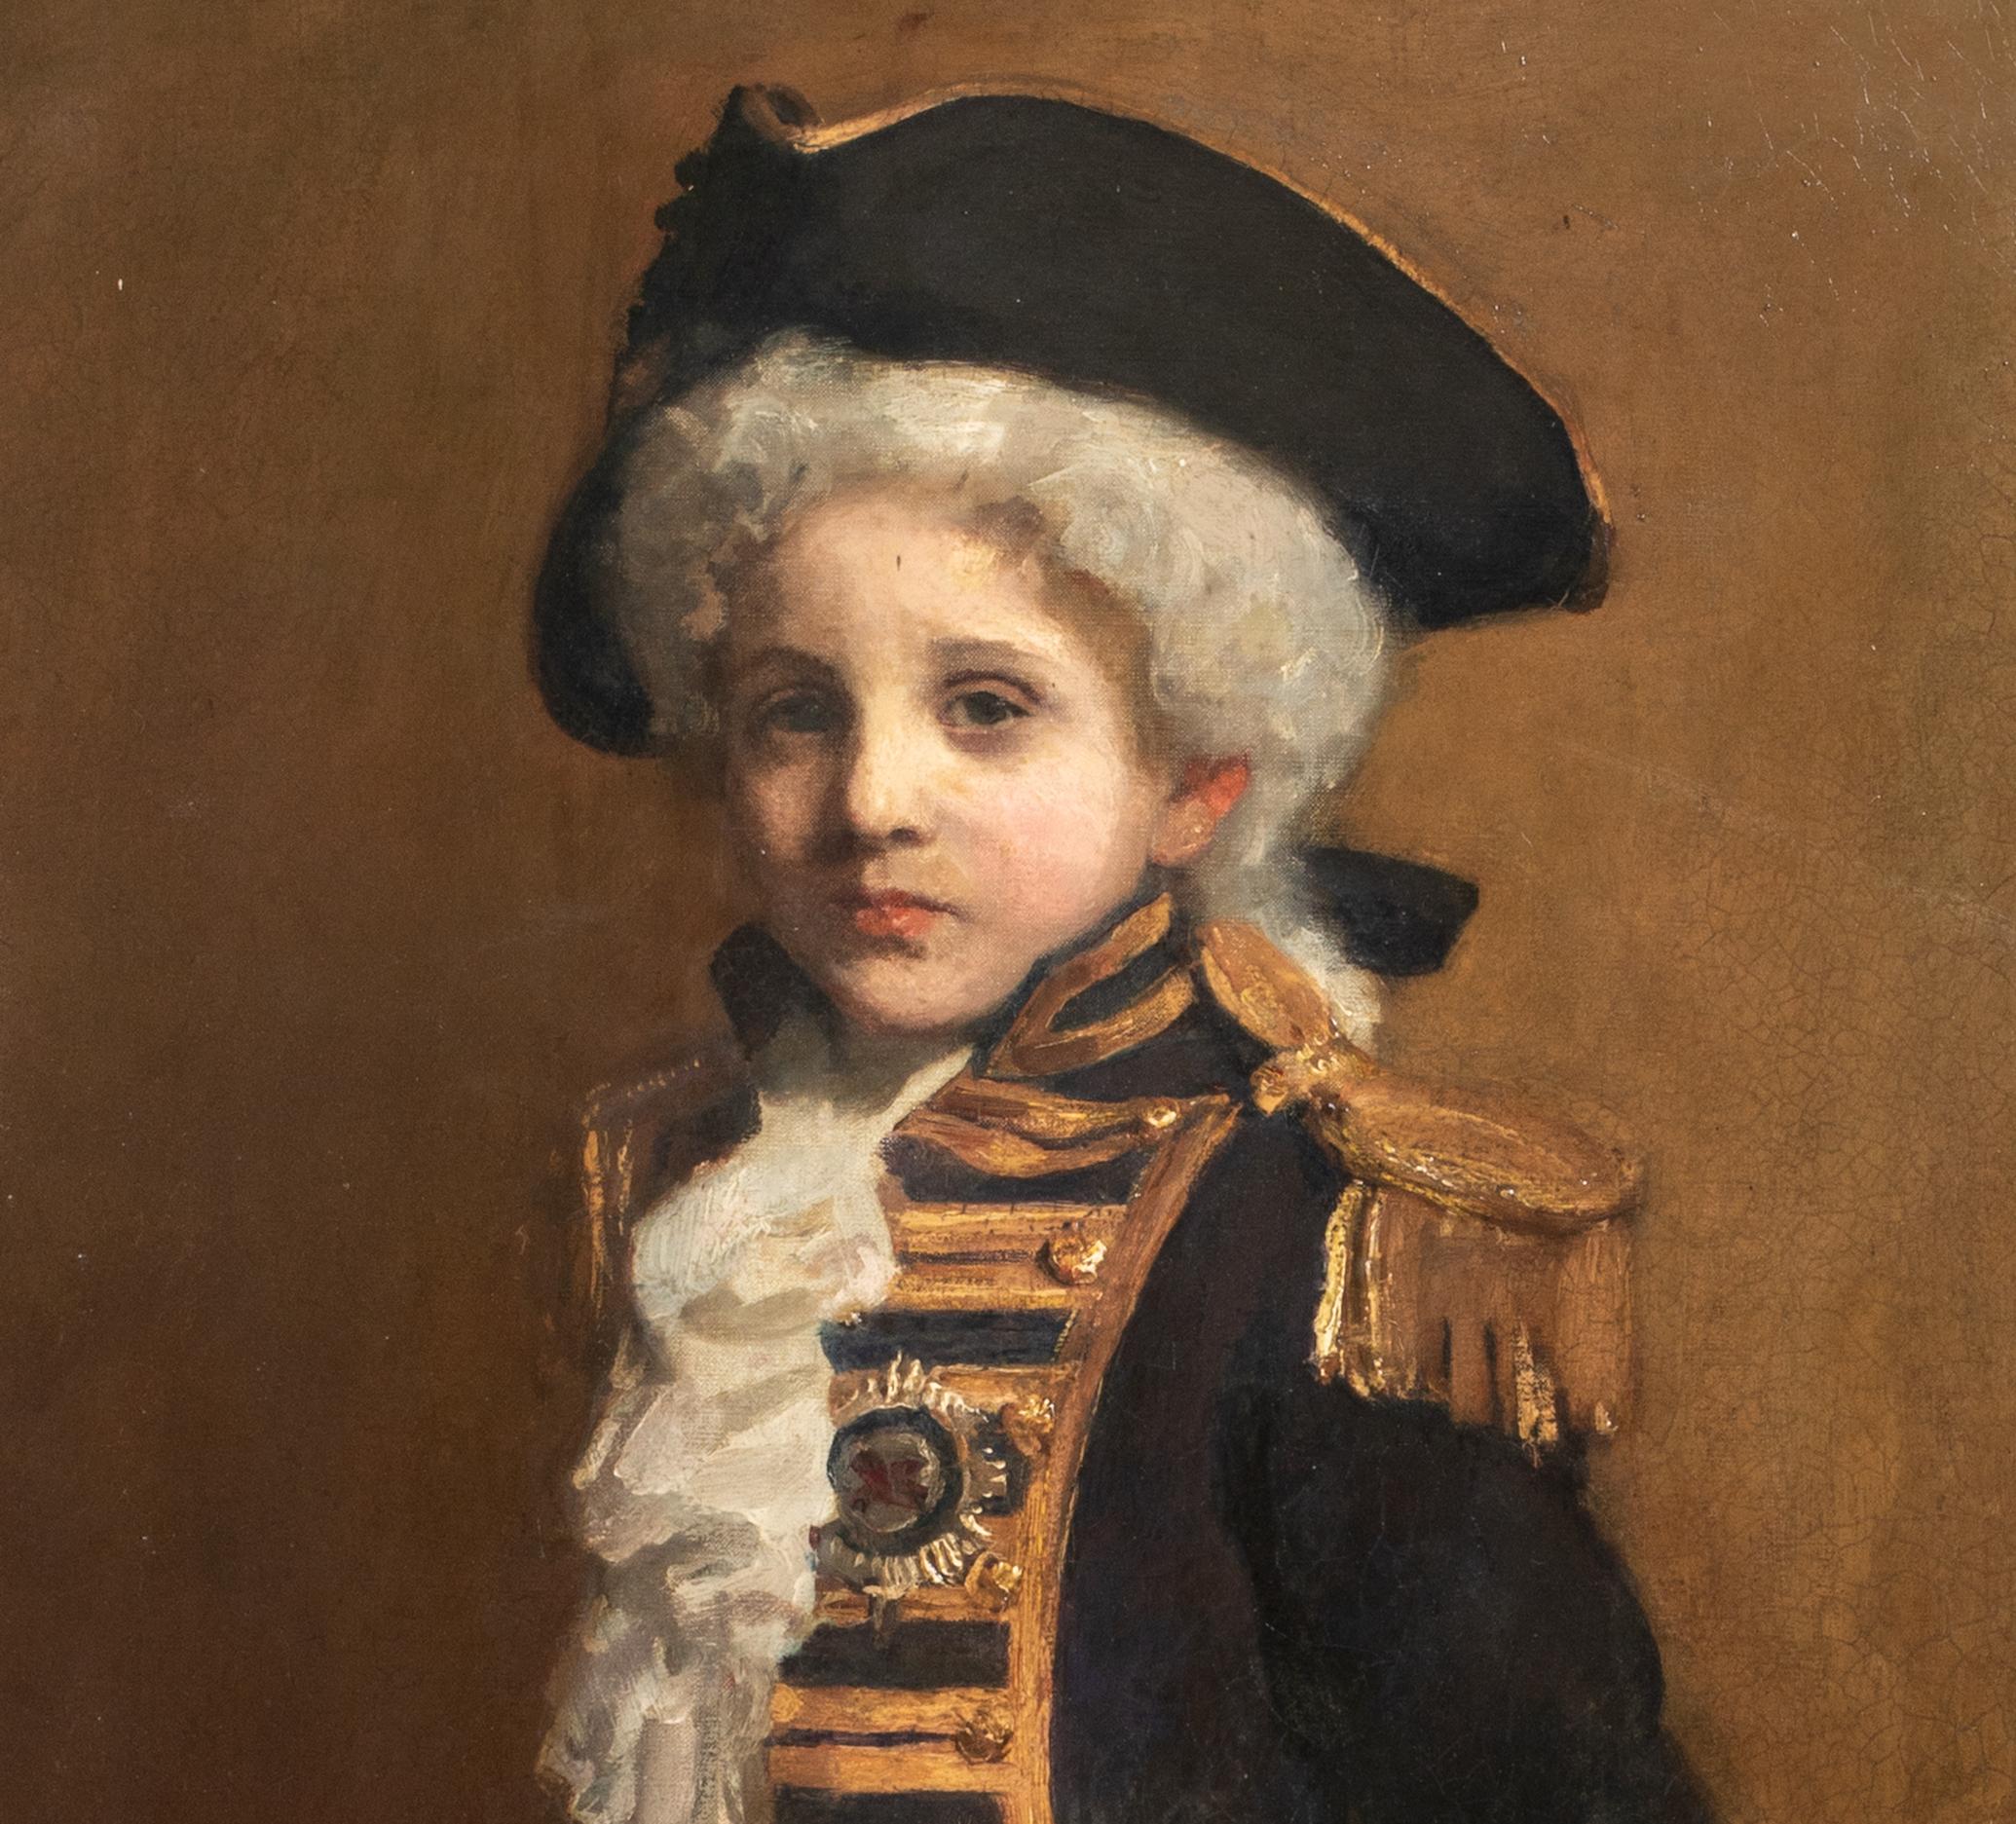  Portrait Of A Child As Lord Nelson, 19th Century   FRANK THOMAS COPNALL For Sale 2